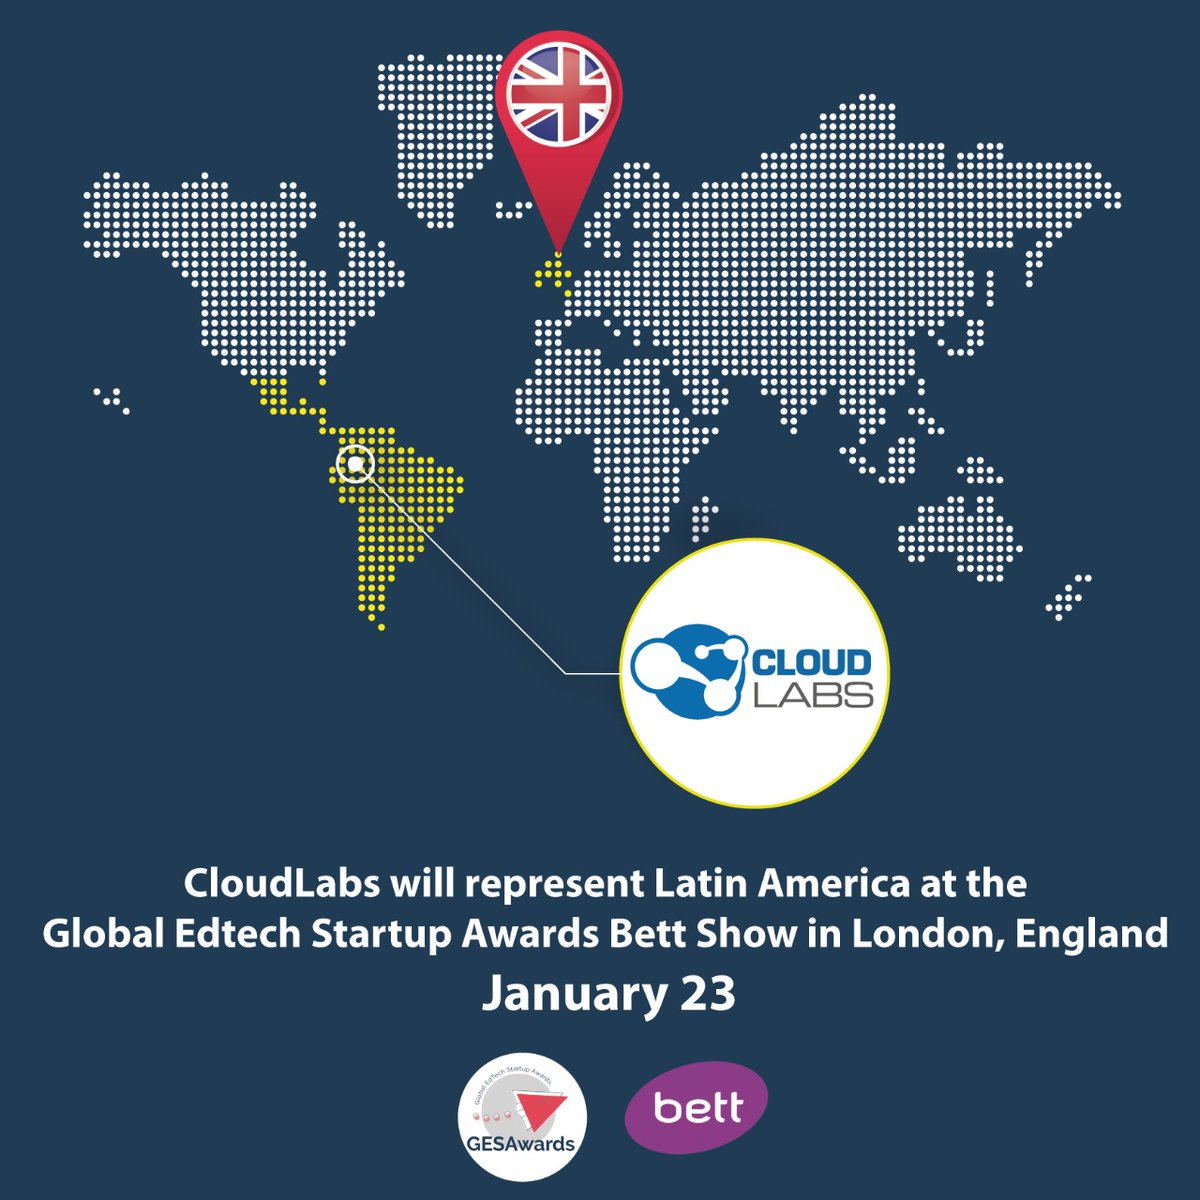 #CloudLabs is one of 18 startups selected as the best from 80+ countries. We will represent Latin America at the finals of the Global Edtech Startup Awards (GESA). This event is looking for the most promising Edtech Startup in the world. #Bett2020 #gesawards #tech #education